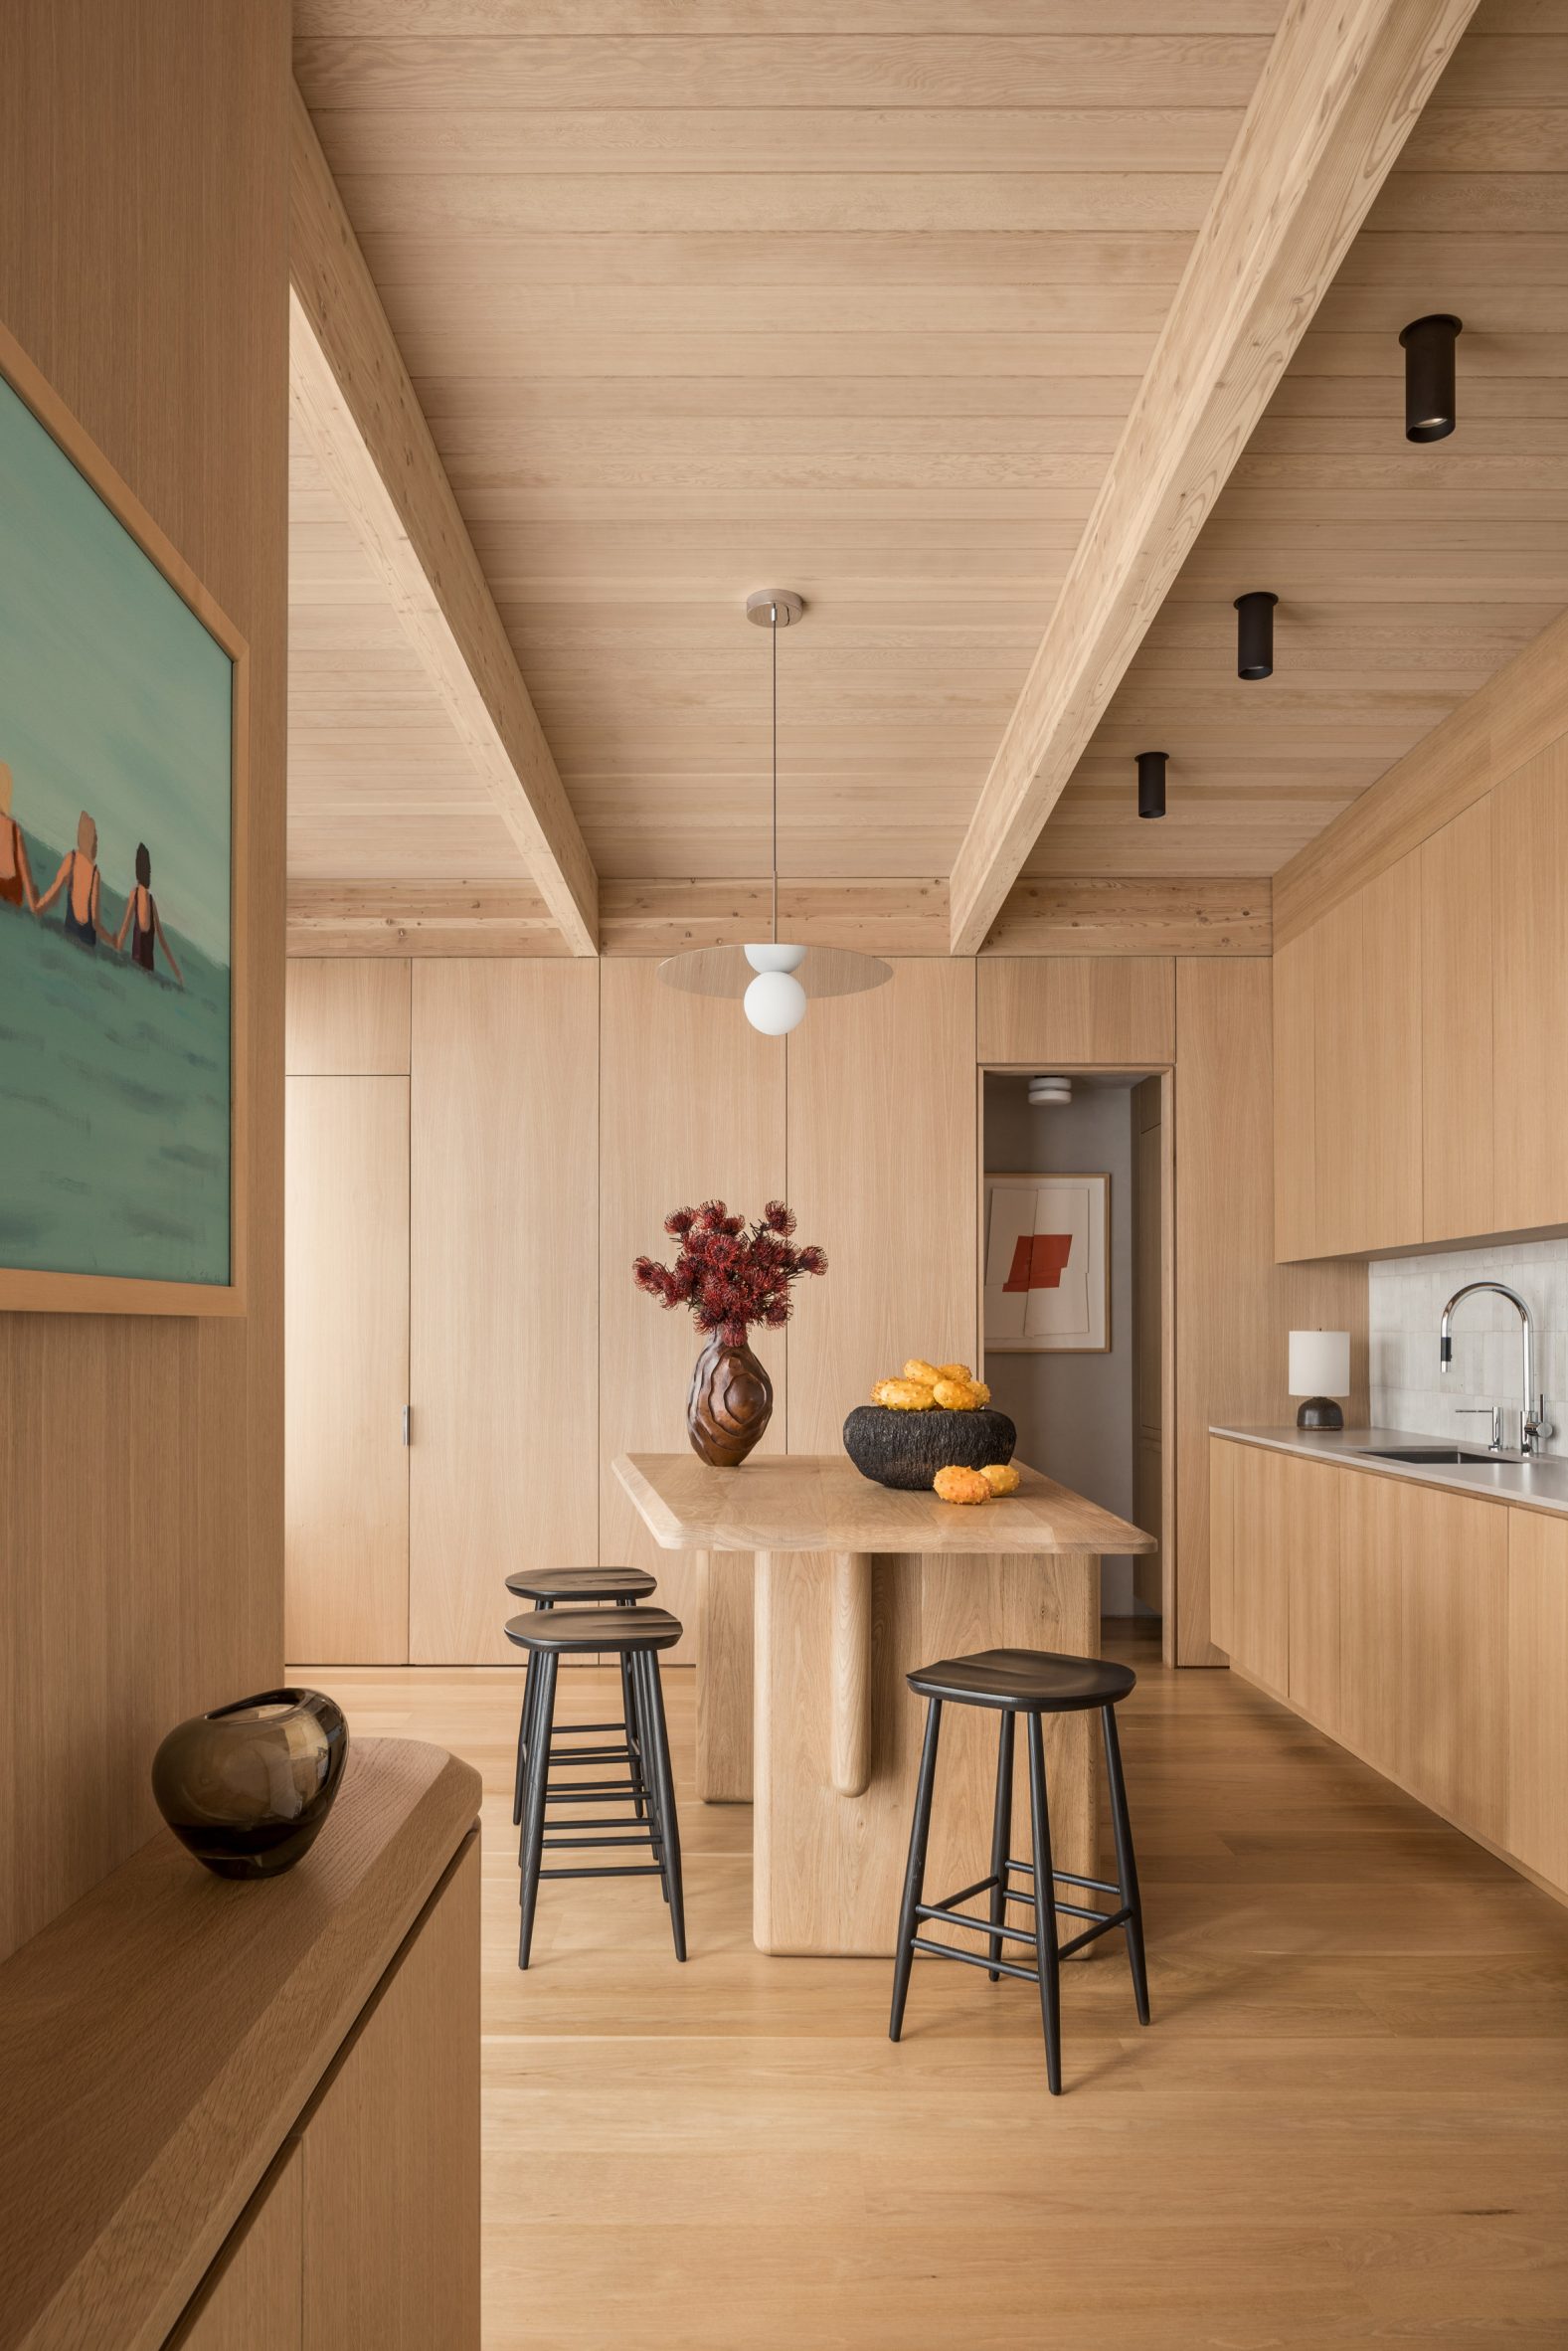 Kitchen interior of The Amagansett Beach House, USA, by Starling Architecture and Emily Lindberg Design